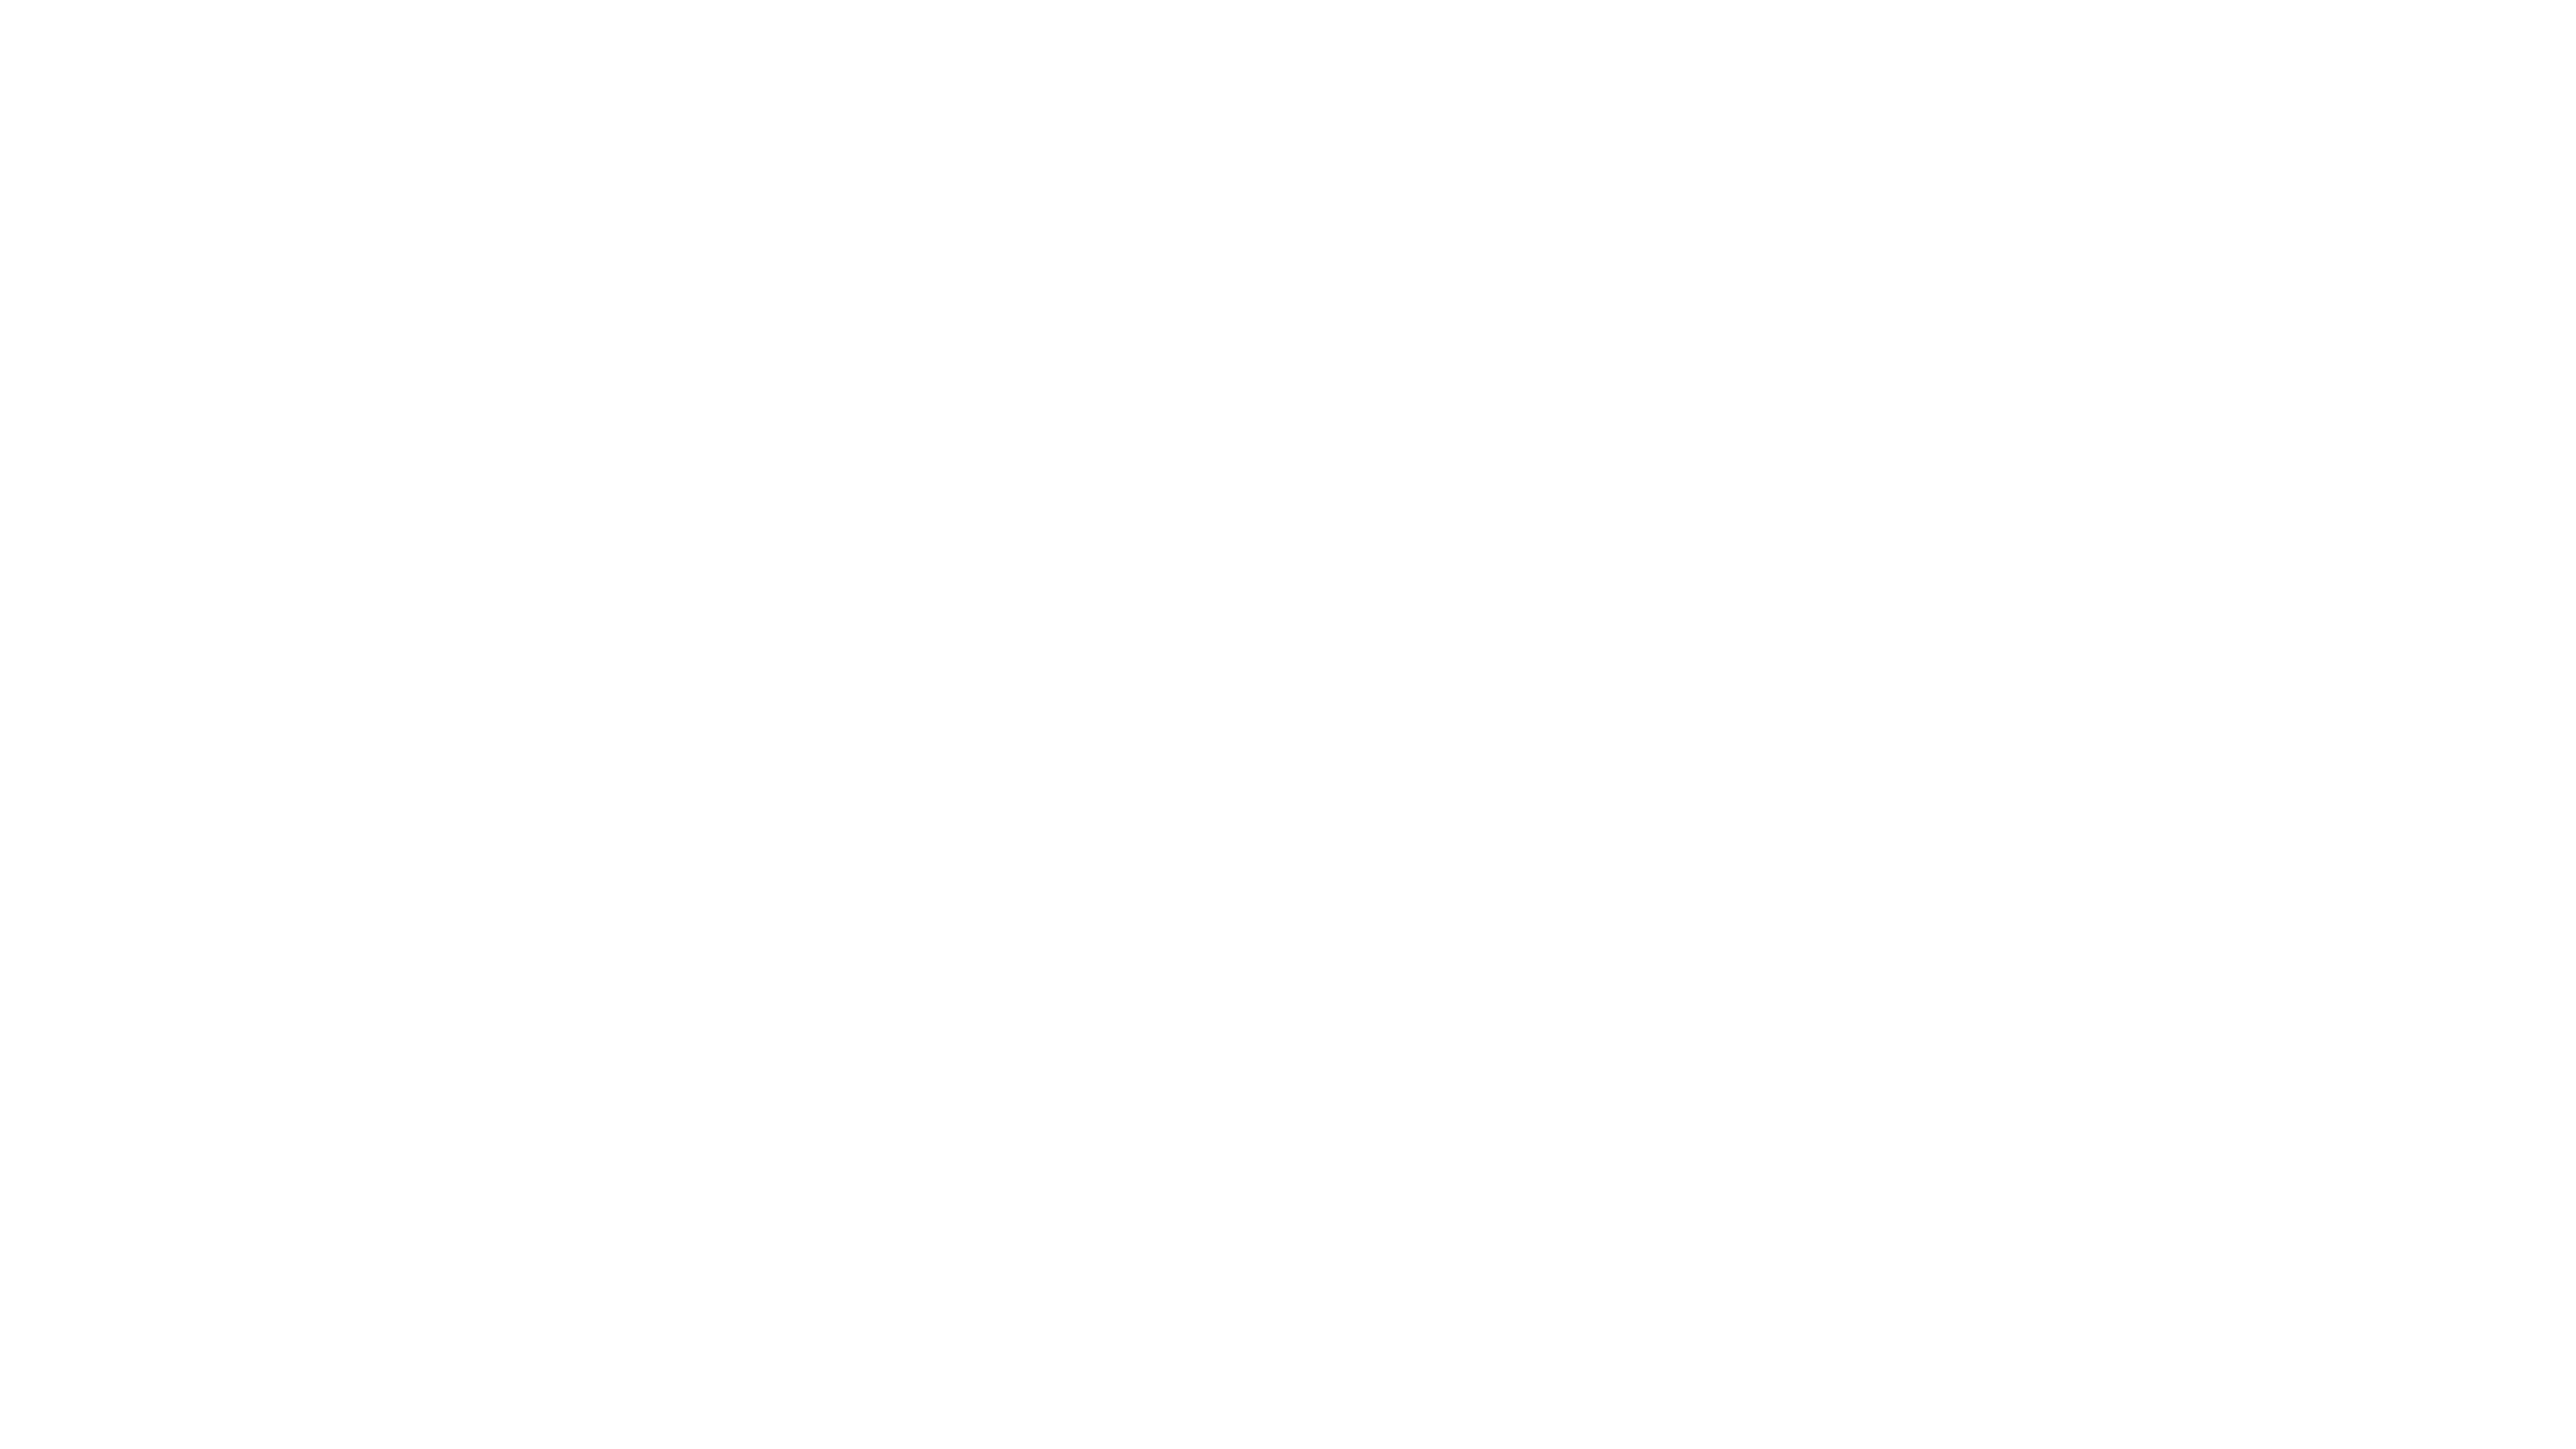 Trade Facts - Alcohol and Drug Foundation